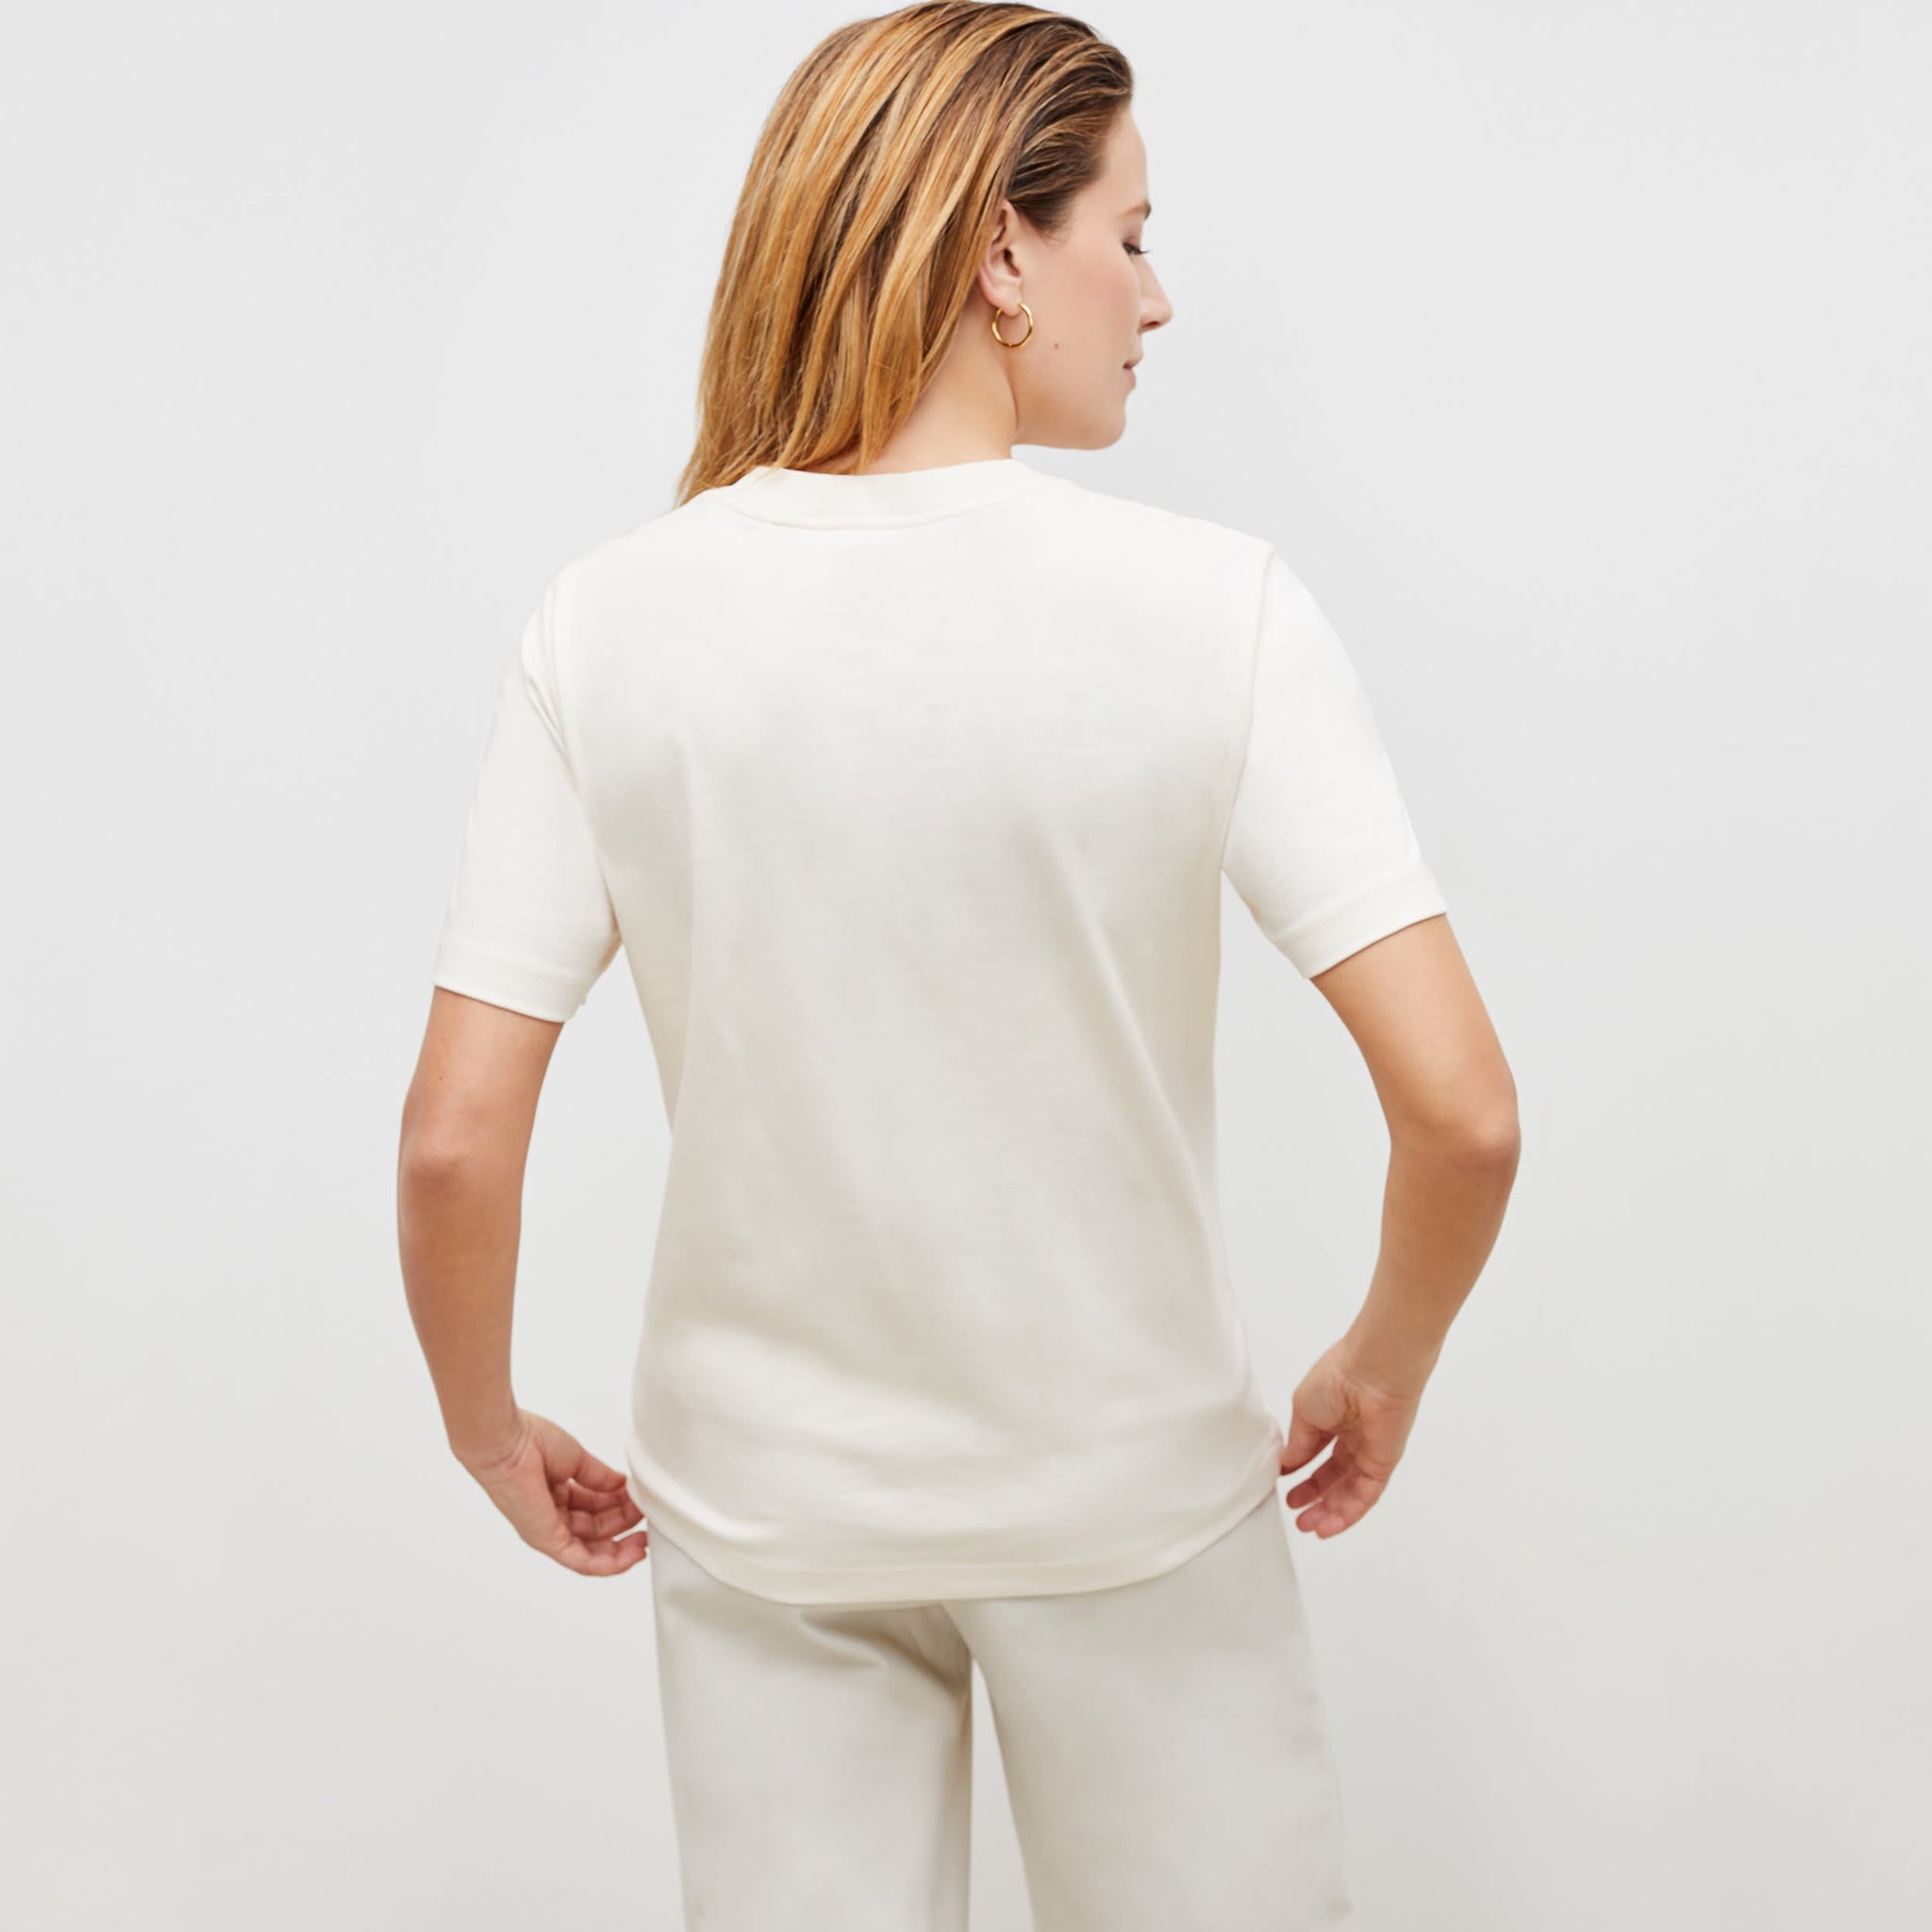 Back image of a woman standing wearing the leslie top in compact cotton in ivory